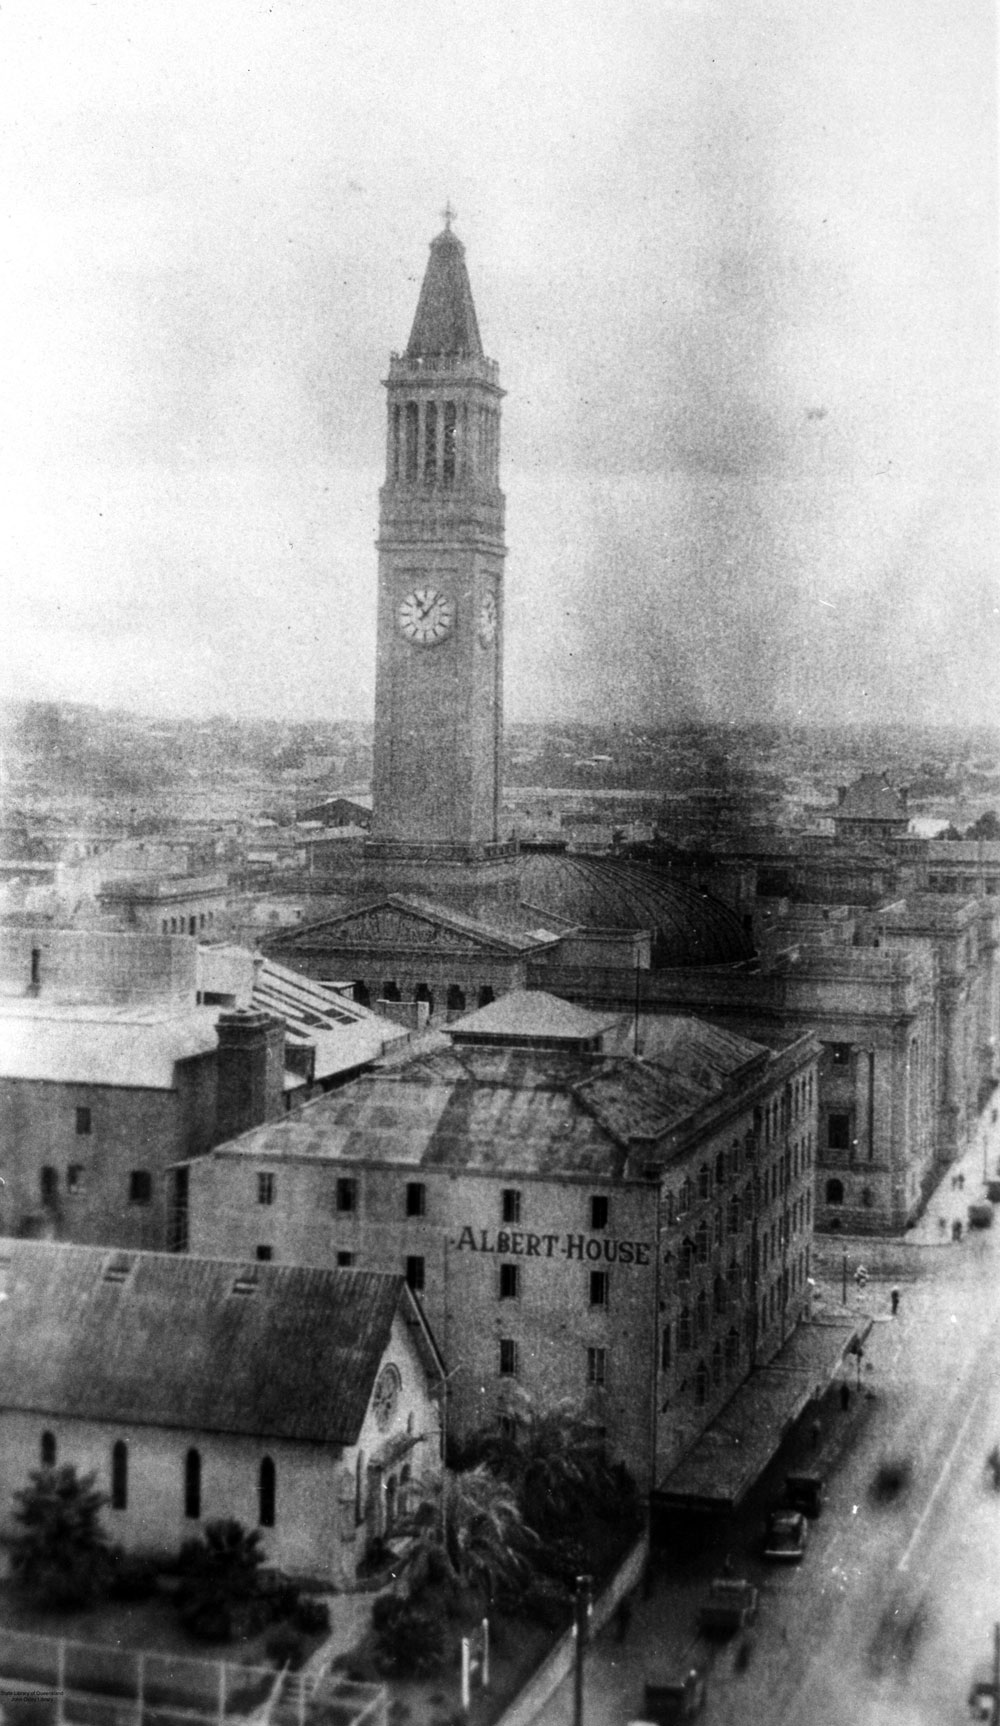 City Hall and surrounding buildings seen from the top of the Canberra Hotel, Ann Street, Brisbane c1936, photograph